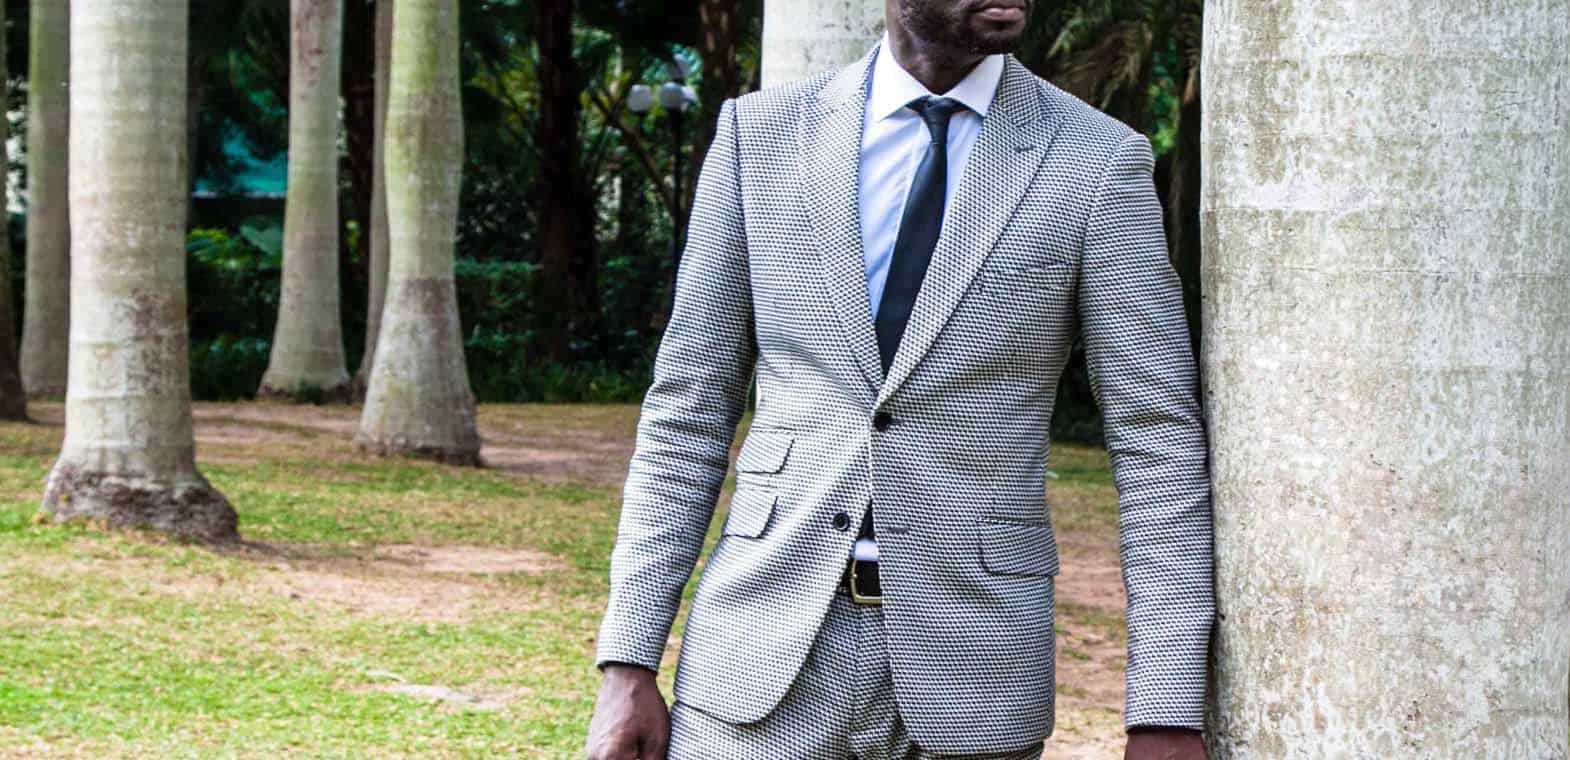 Tailor-made suit by Ghanaian tailor Adjei Anang